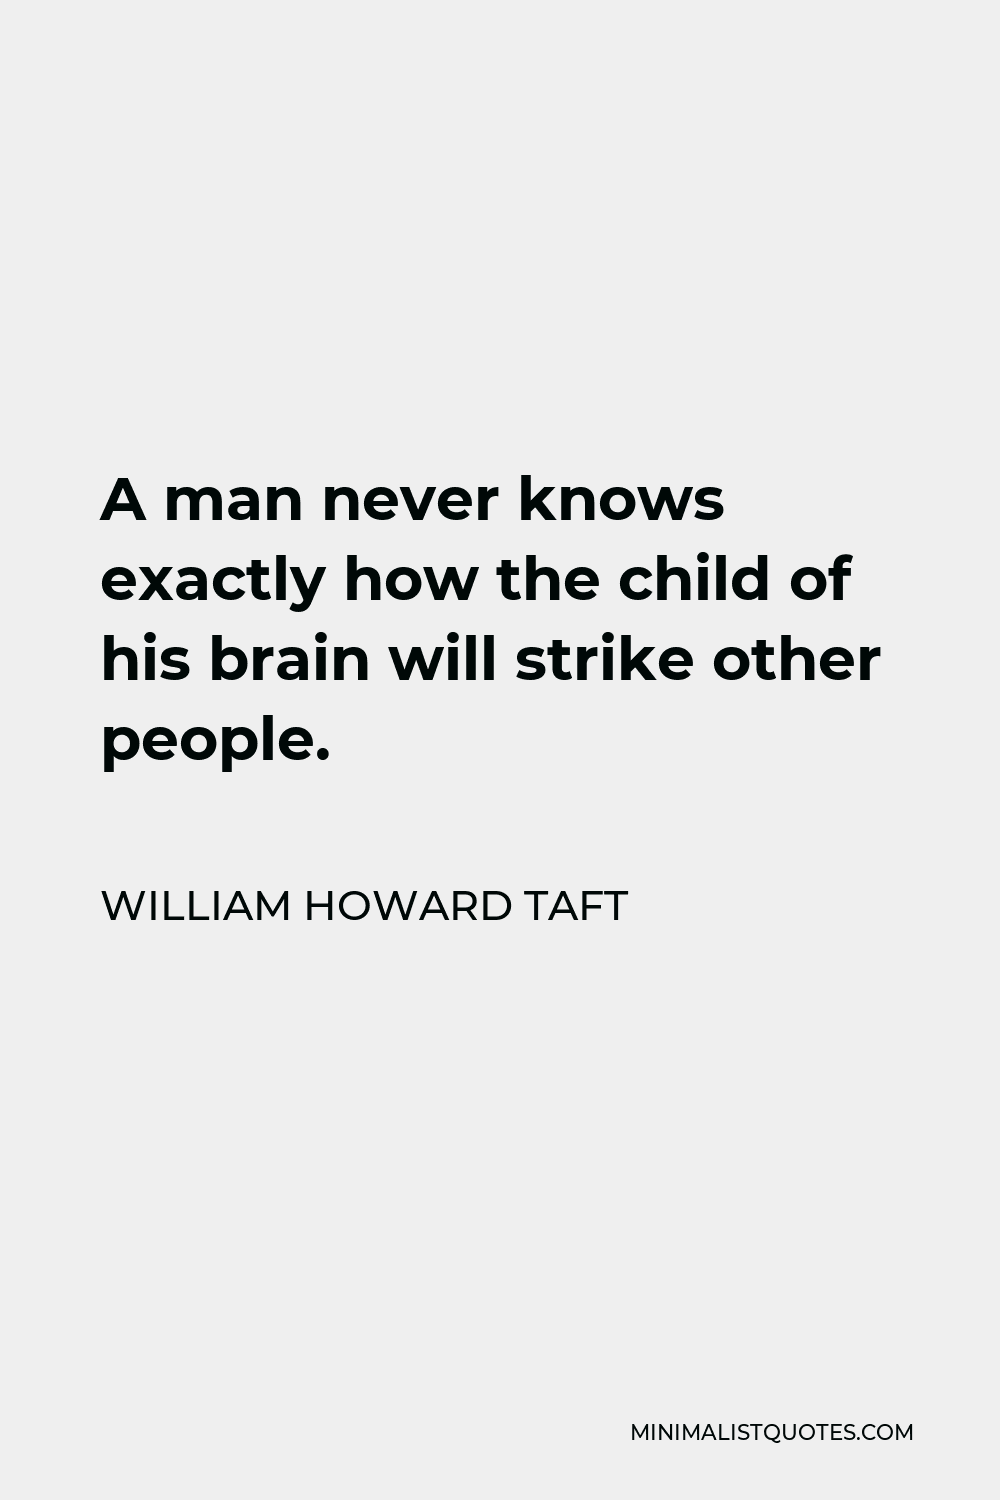 William Howard Taft Quote - A man never knows exactly how the child of his brain will strike other people.